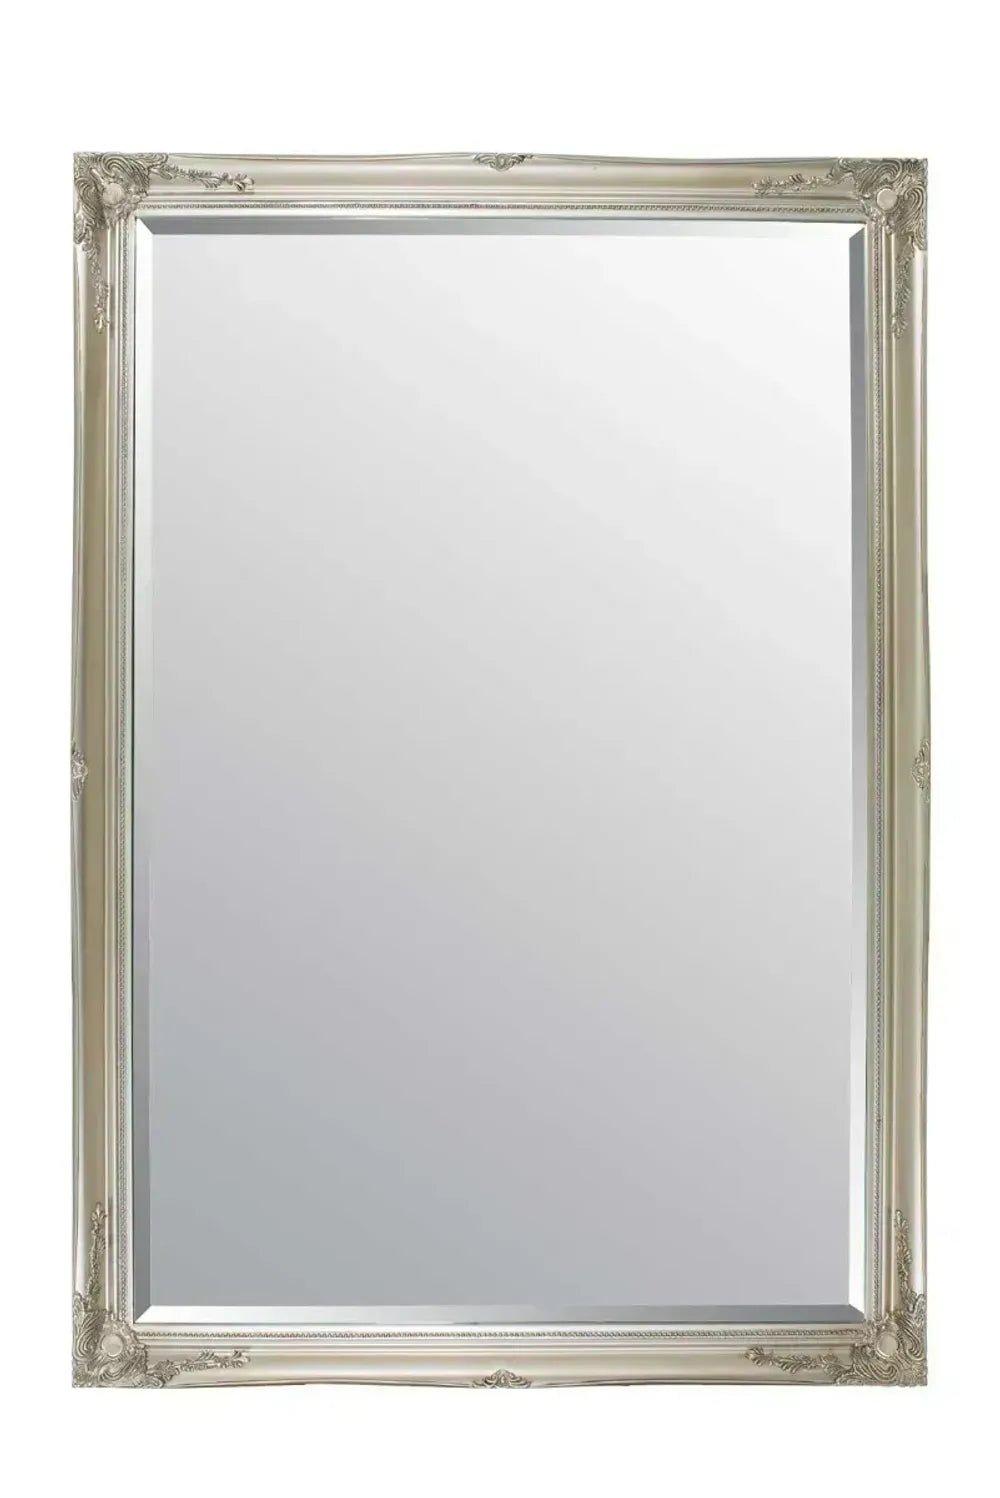 BUXTON EXTRA LARGE LEANER MIRROR 201 X 140CM - Lilpins Essentials